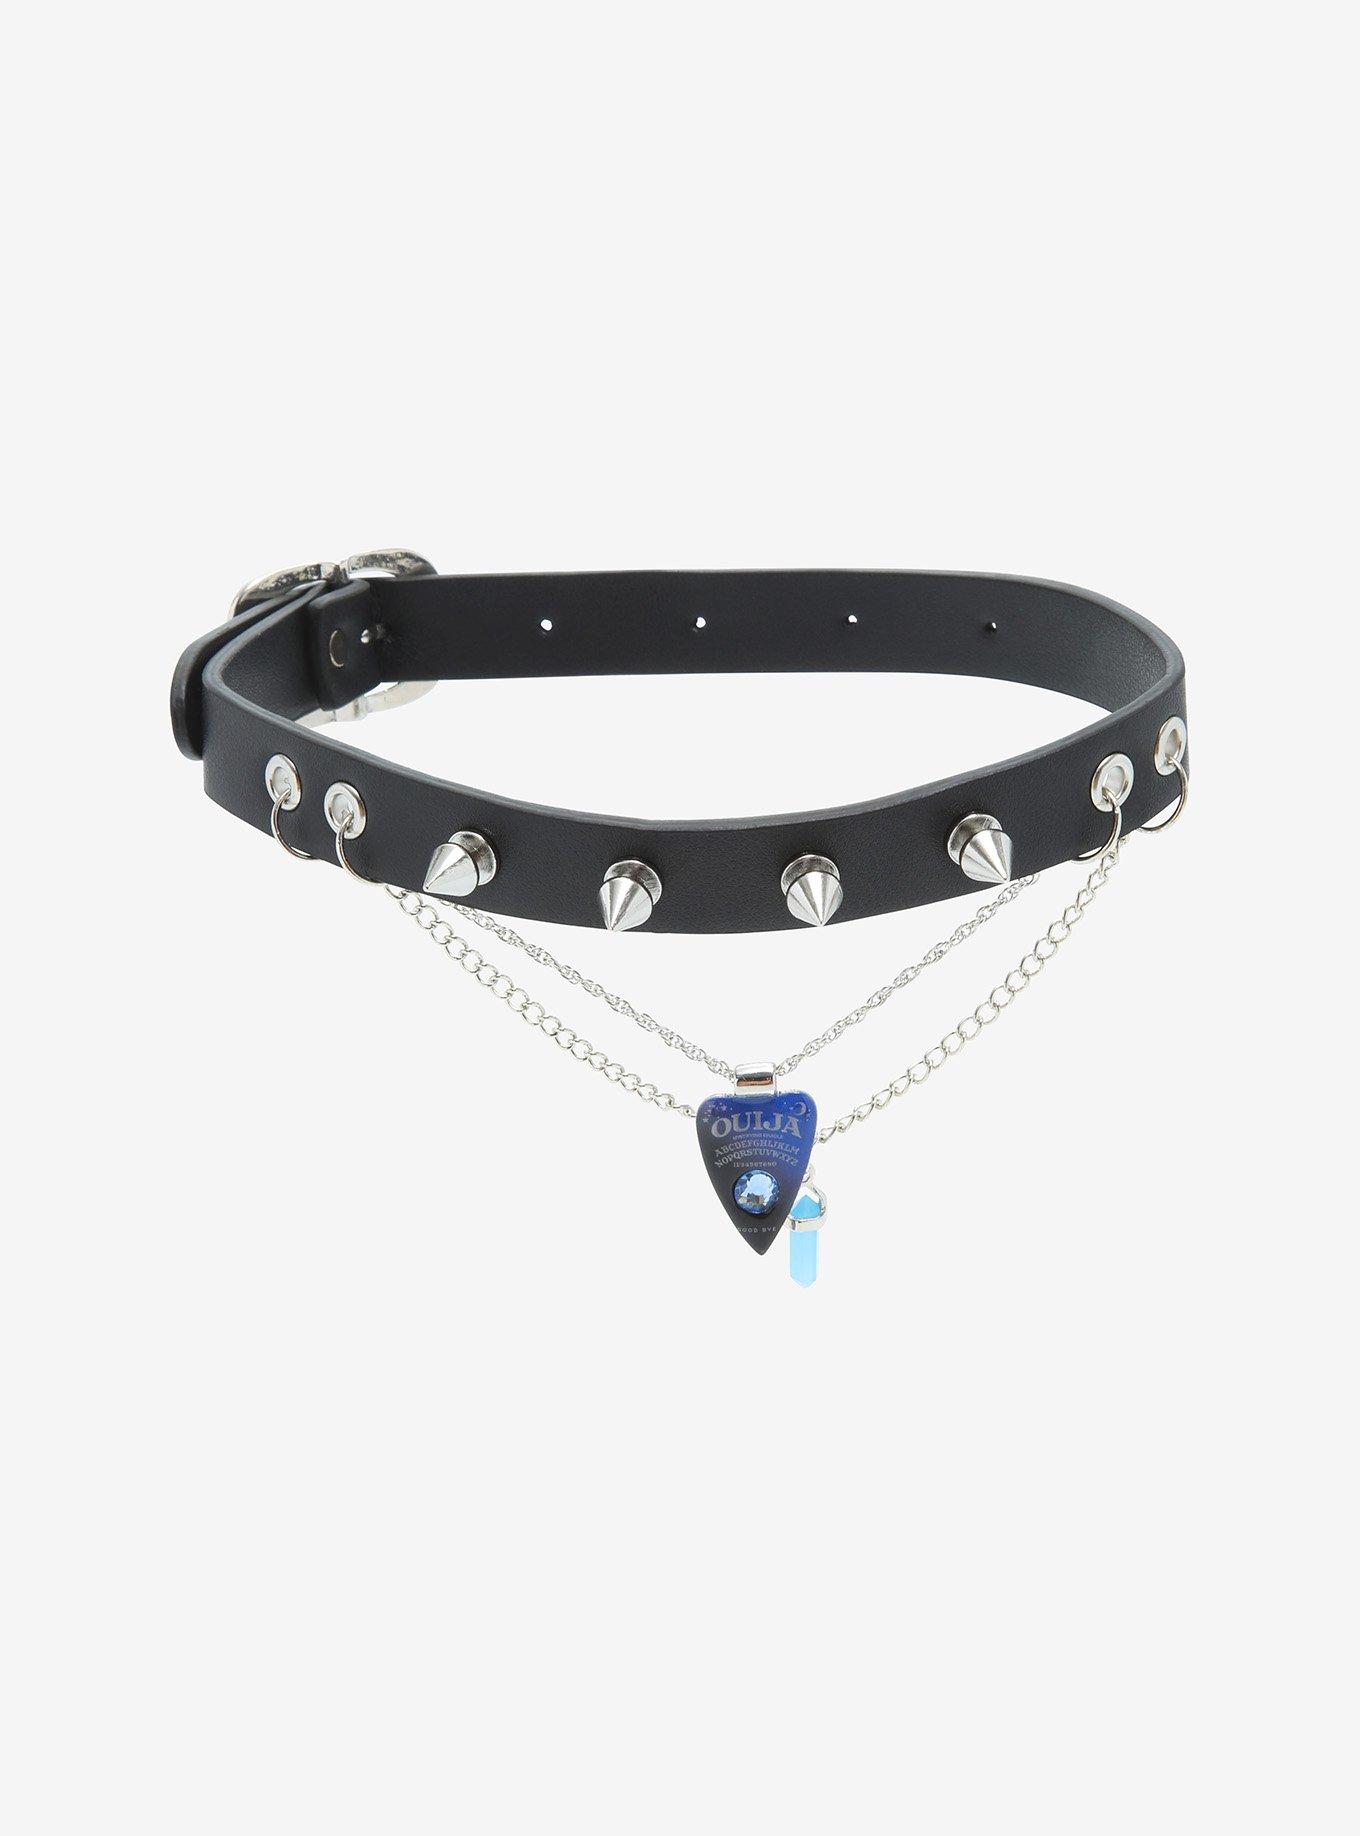 Ouija Planchette Blue Crystal Double Chain Choker, , hi-res